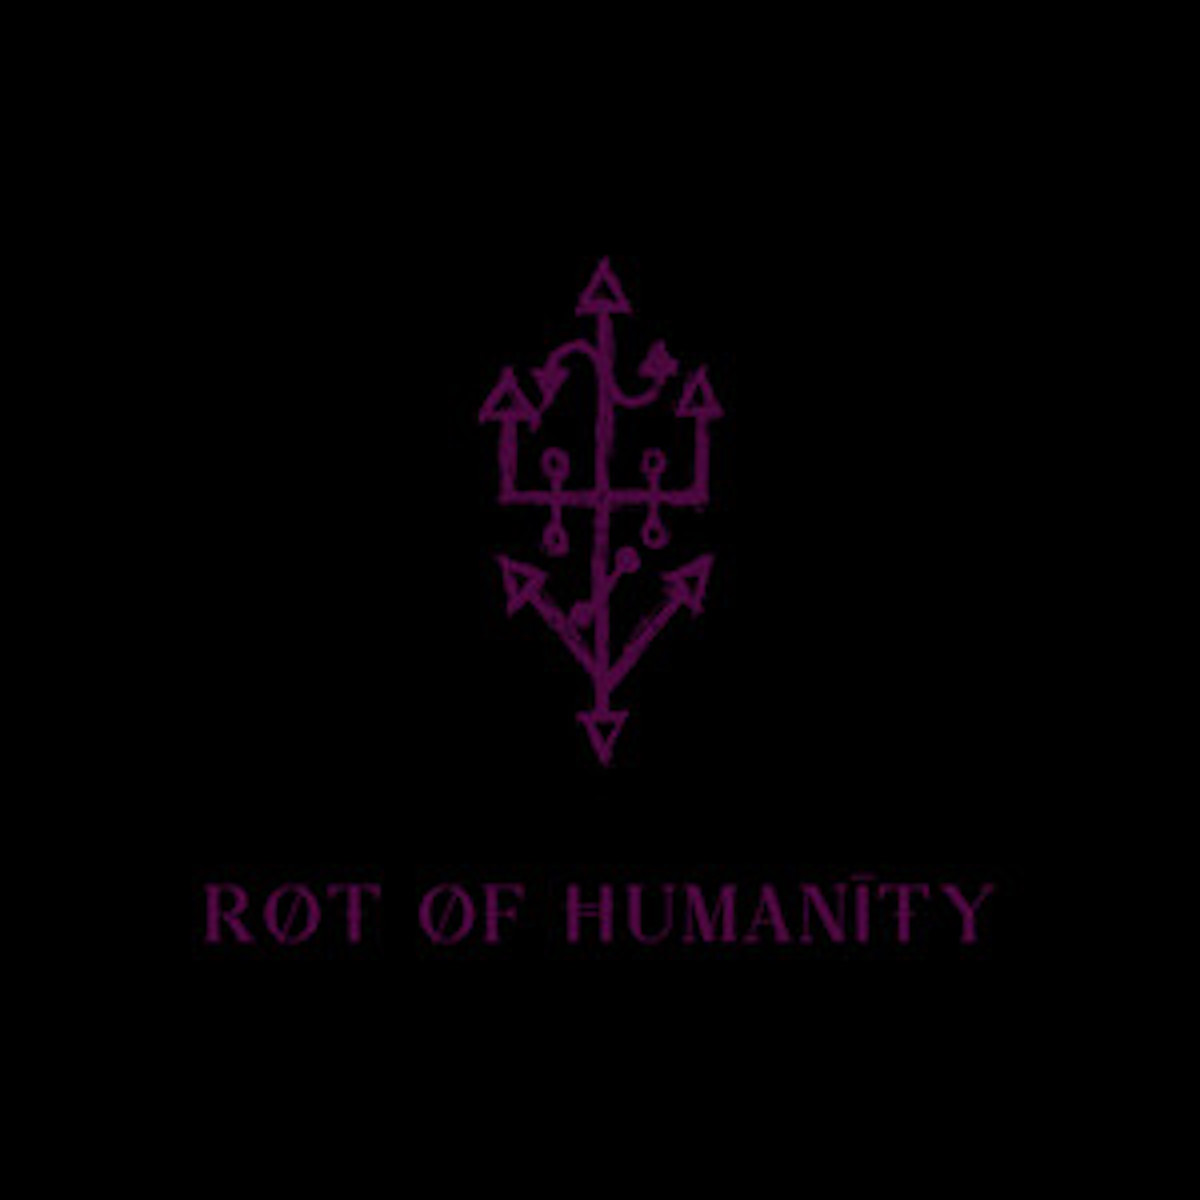 HOT TRACK: “Rot of Humanity” by Eighteen Visions